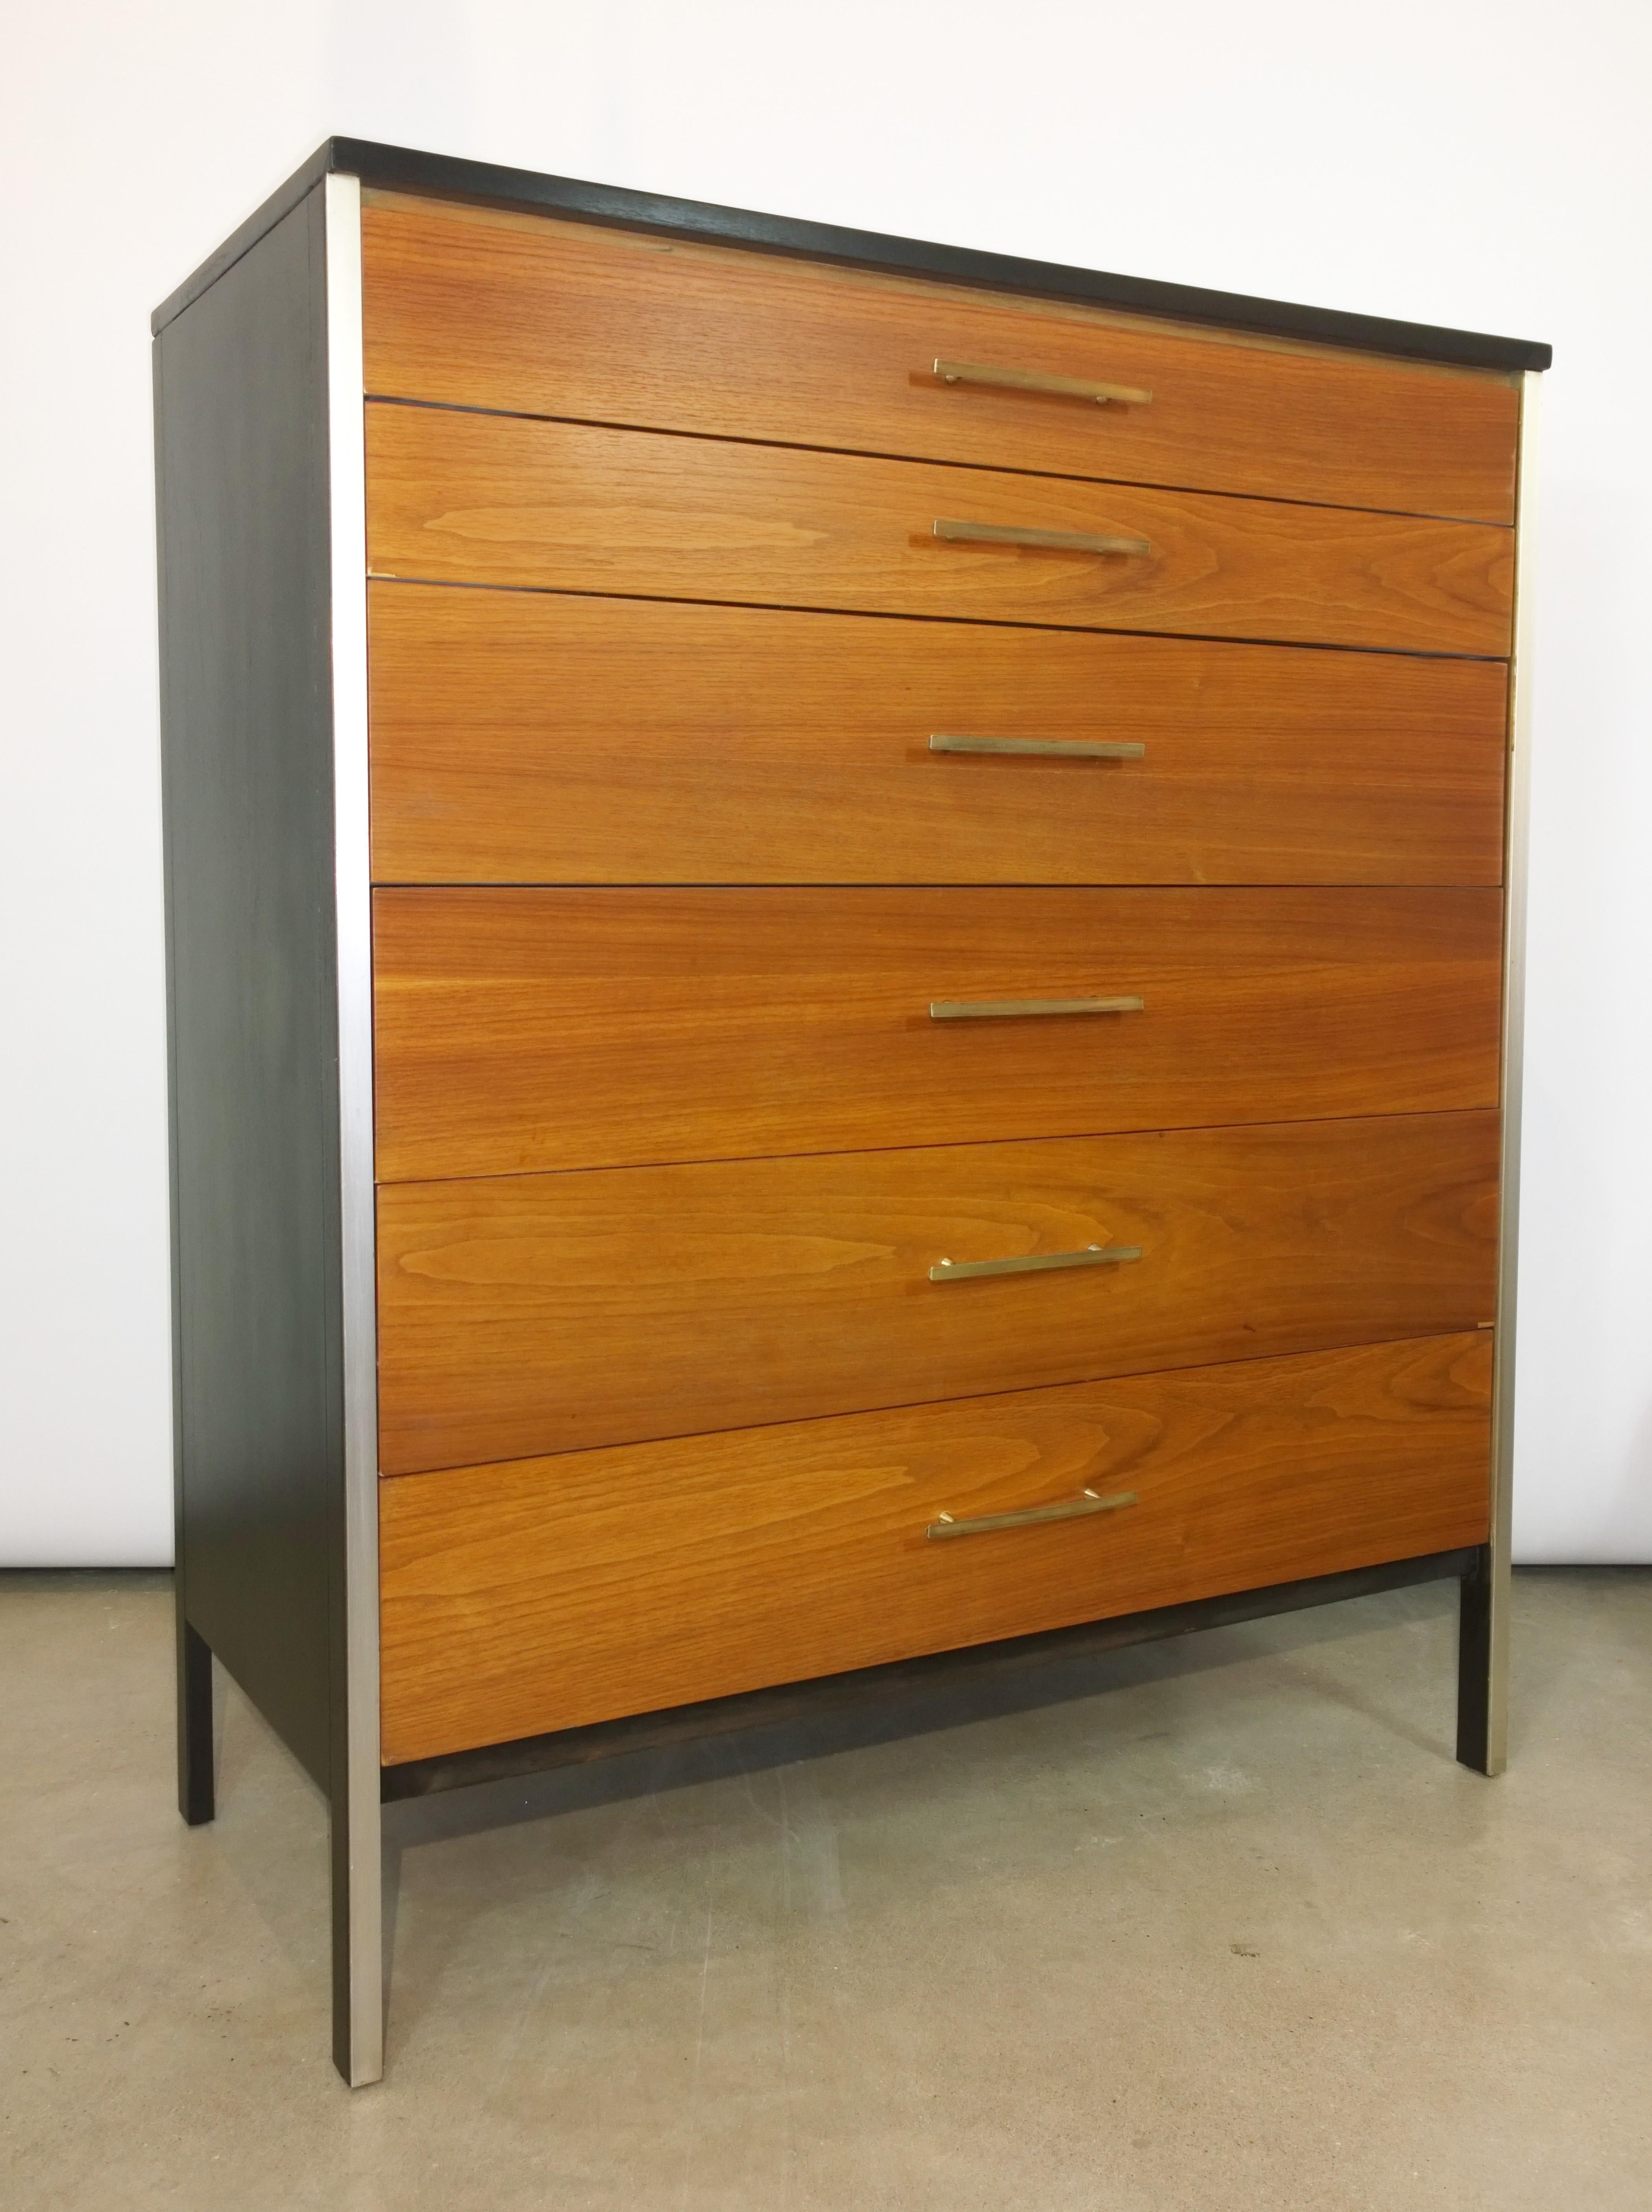 Offered is a signed Mid-Century Modern Paul McCobb for Calvin refurbished black walnut frame with six natural color walnut drawers, accompanied by brass pulls and accents, chest of drawers / highboy. The frame of the dresser has been recently